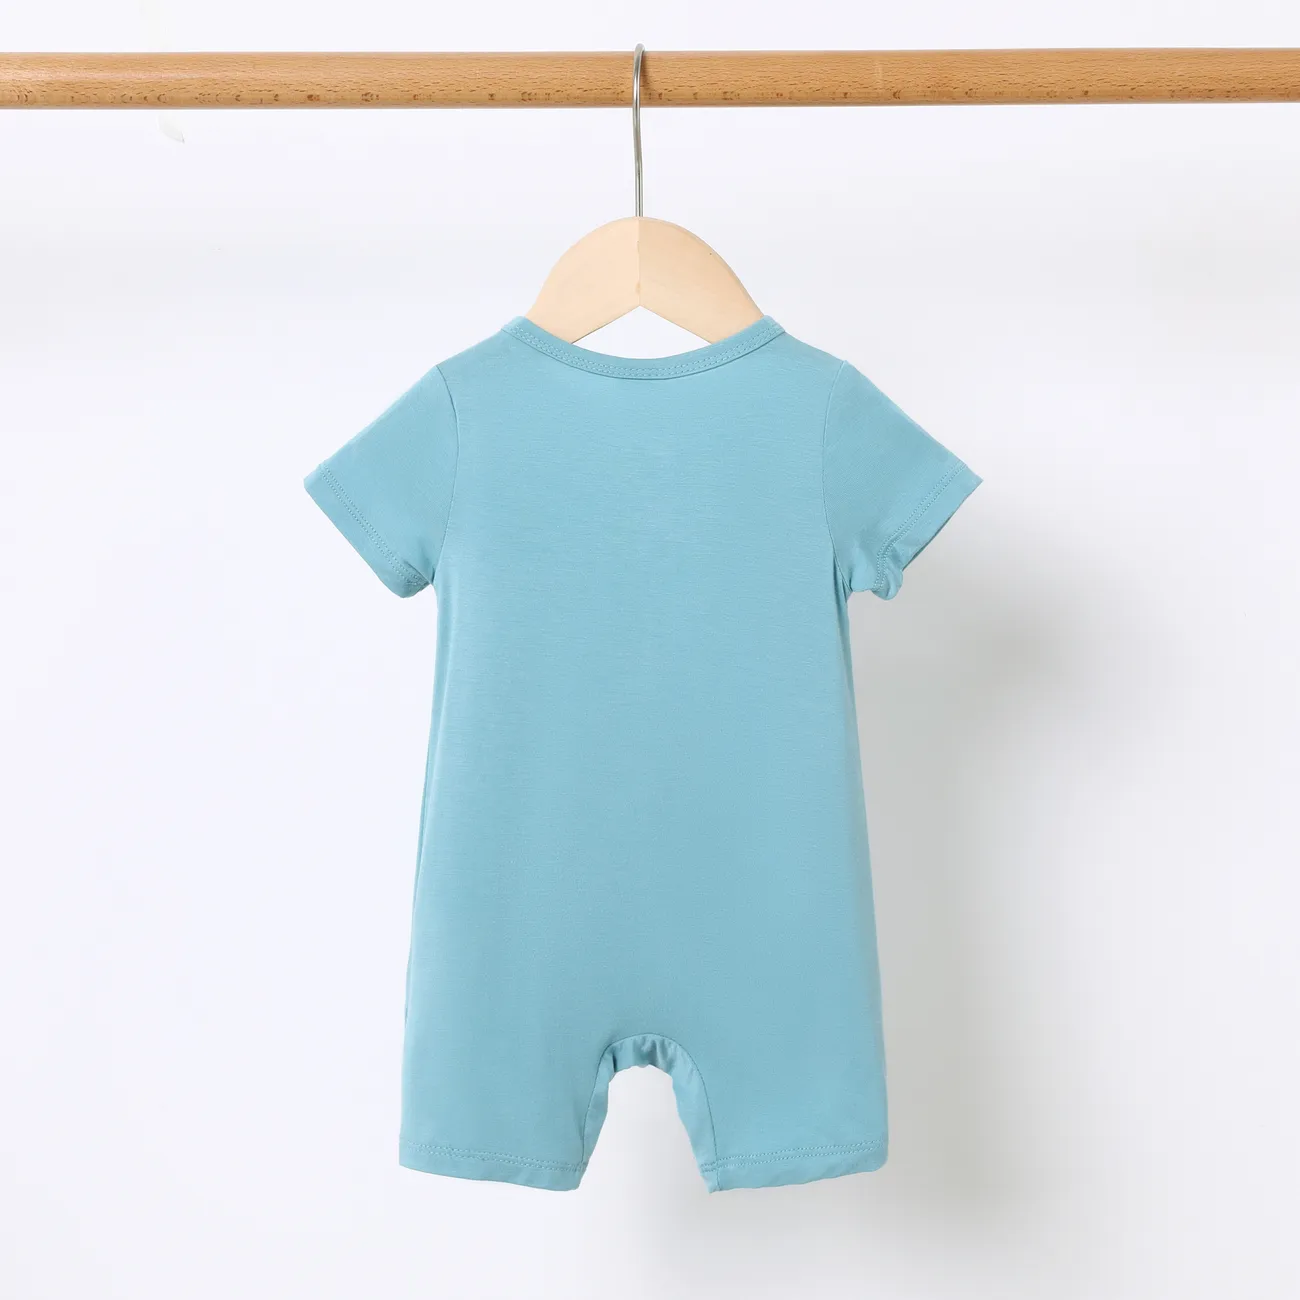 Childlike Solid Color Romper with Secret Button for Unisex Baby Bluish Grey big image 1